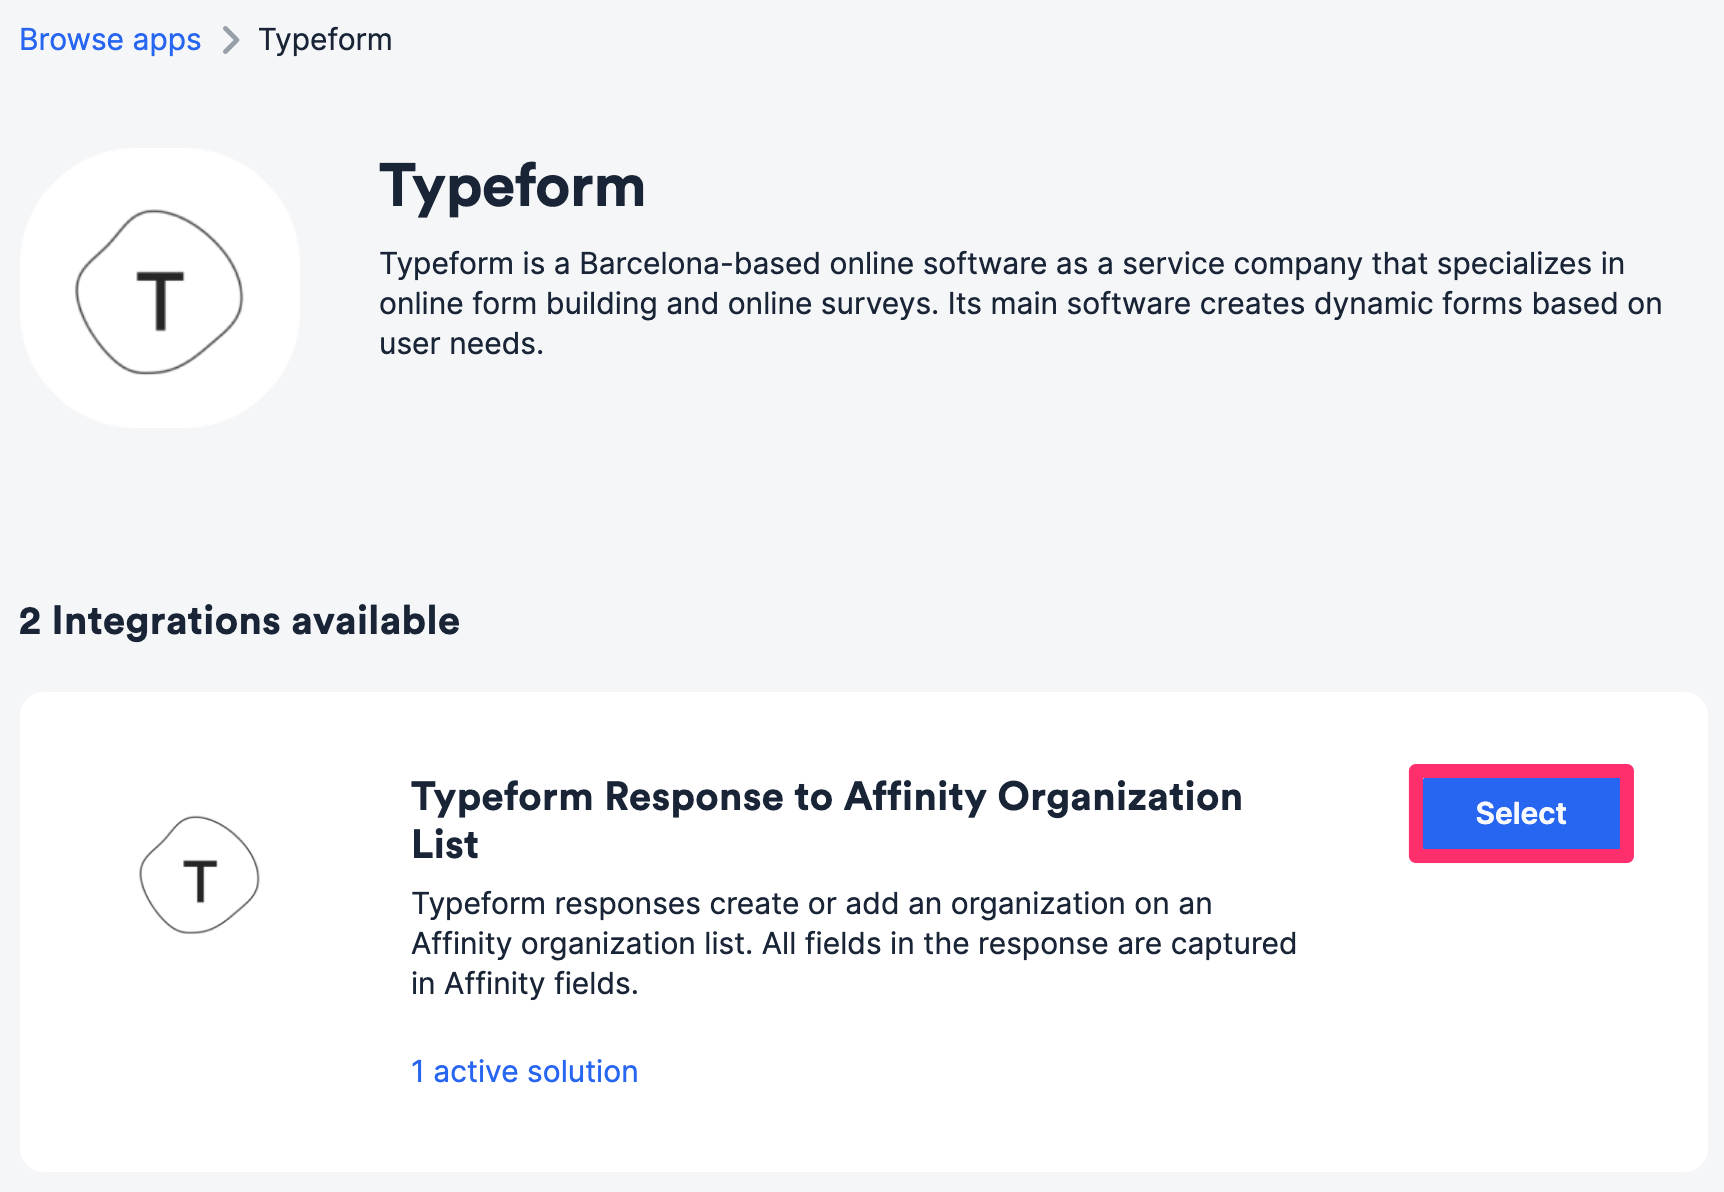 Typeform_to_Affinity_Org_List.png